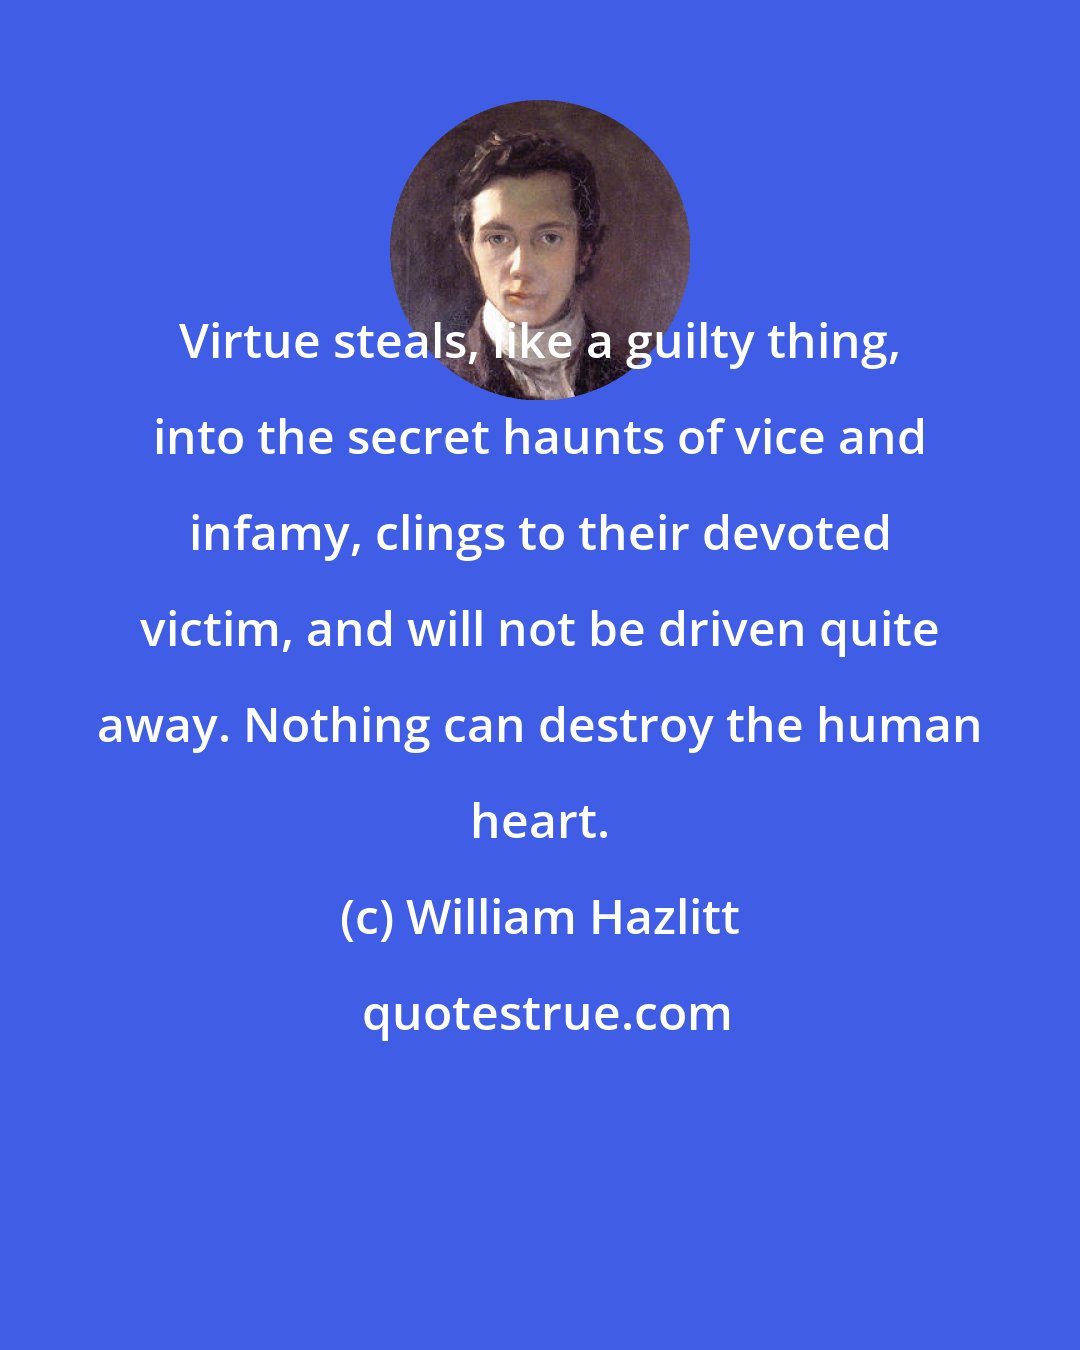 William Hazlitt: Virtue steals, like a guilty thing, into the secret haunts of vice and infamy, clings to their devoted victim, and will not be driven quite away. Nothing can destroy the human heart.